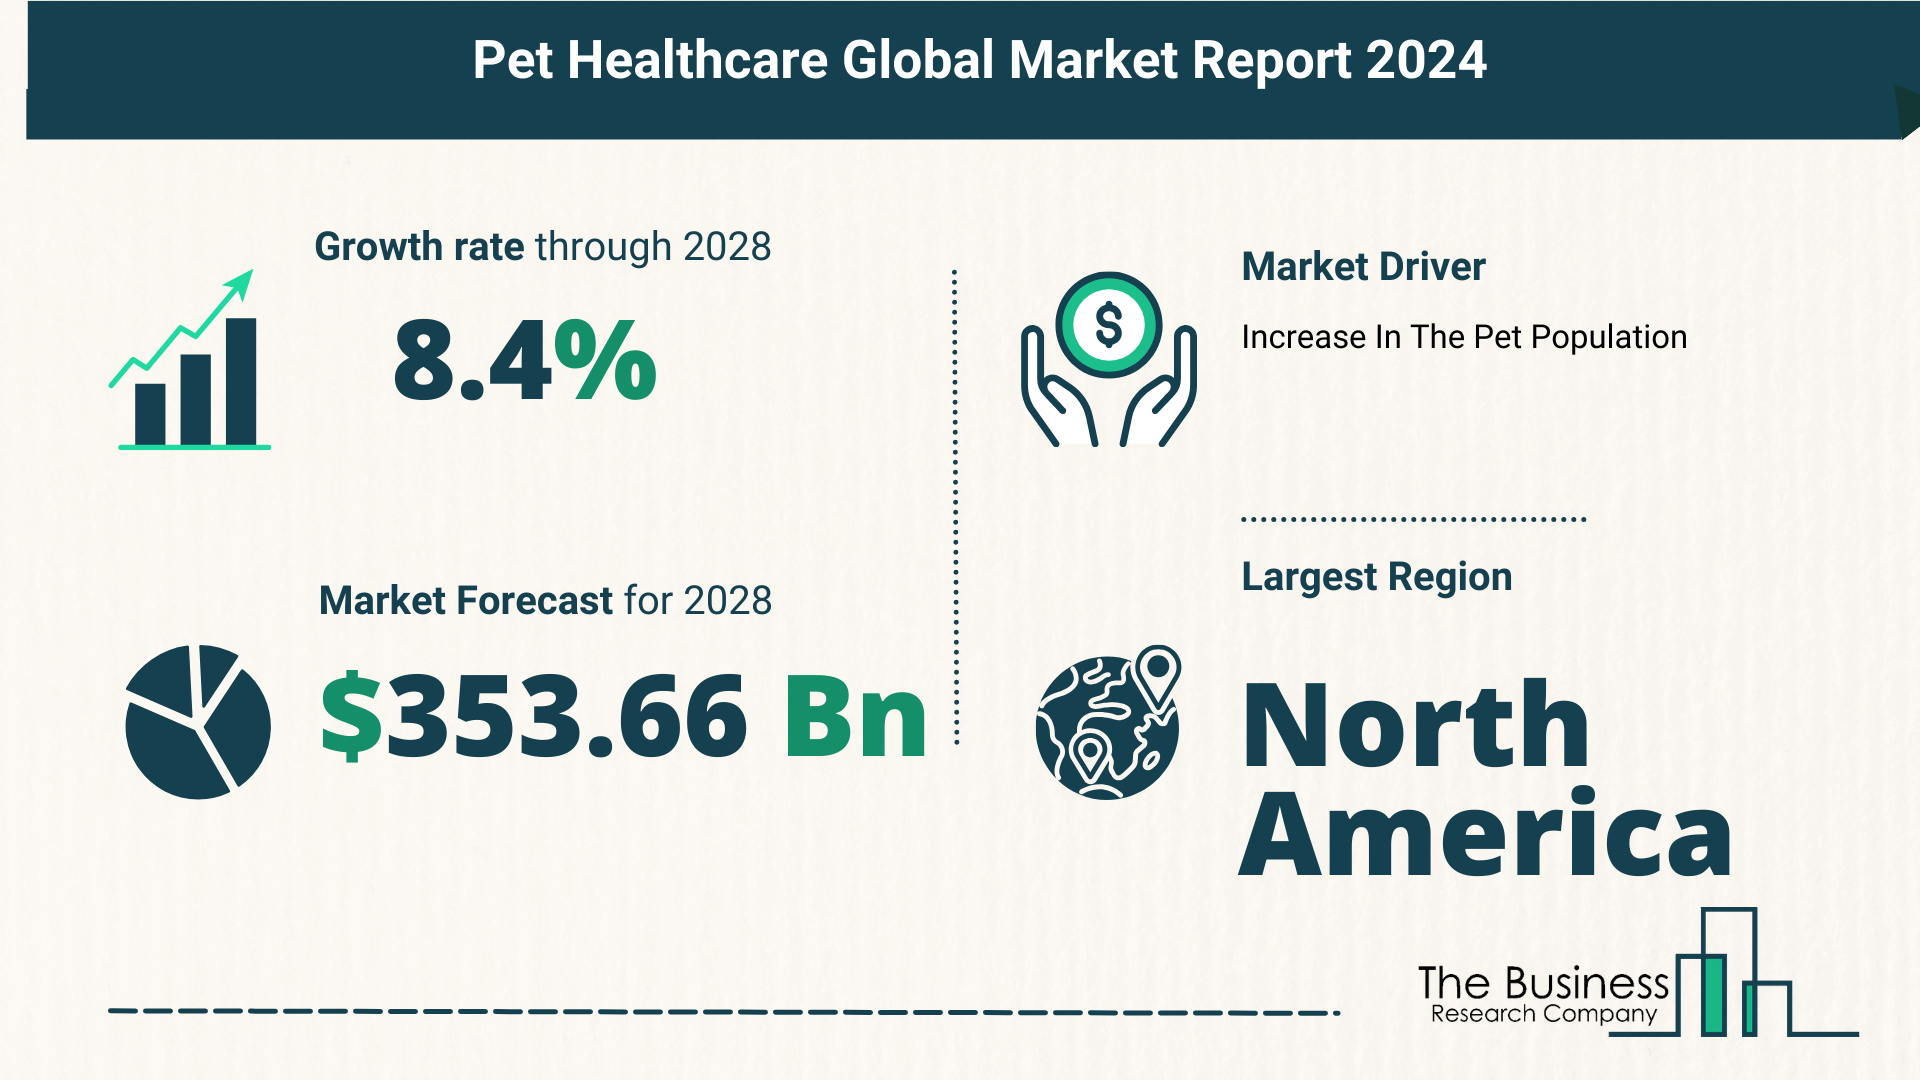 Key Trends And Drivers In The Pet Healthcare Market 2024